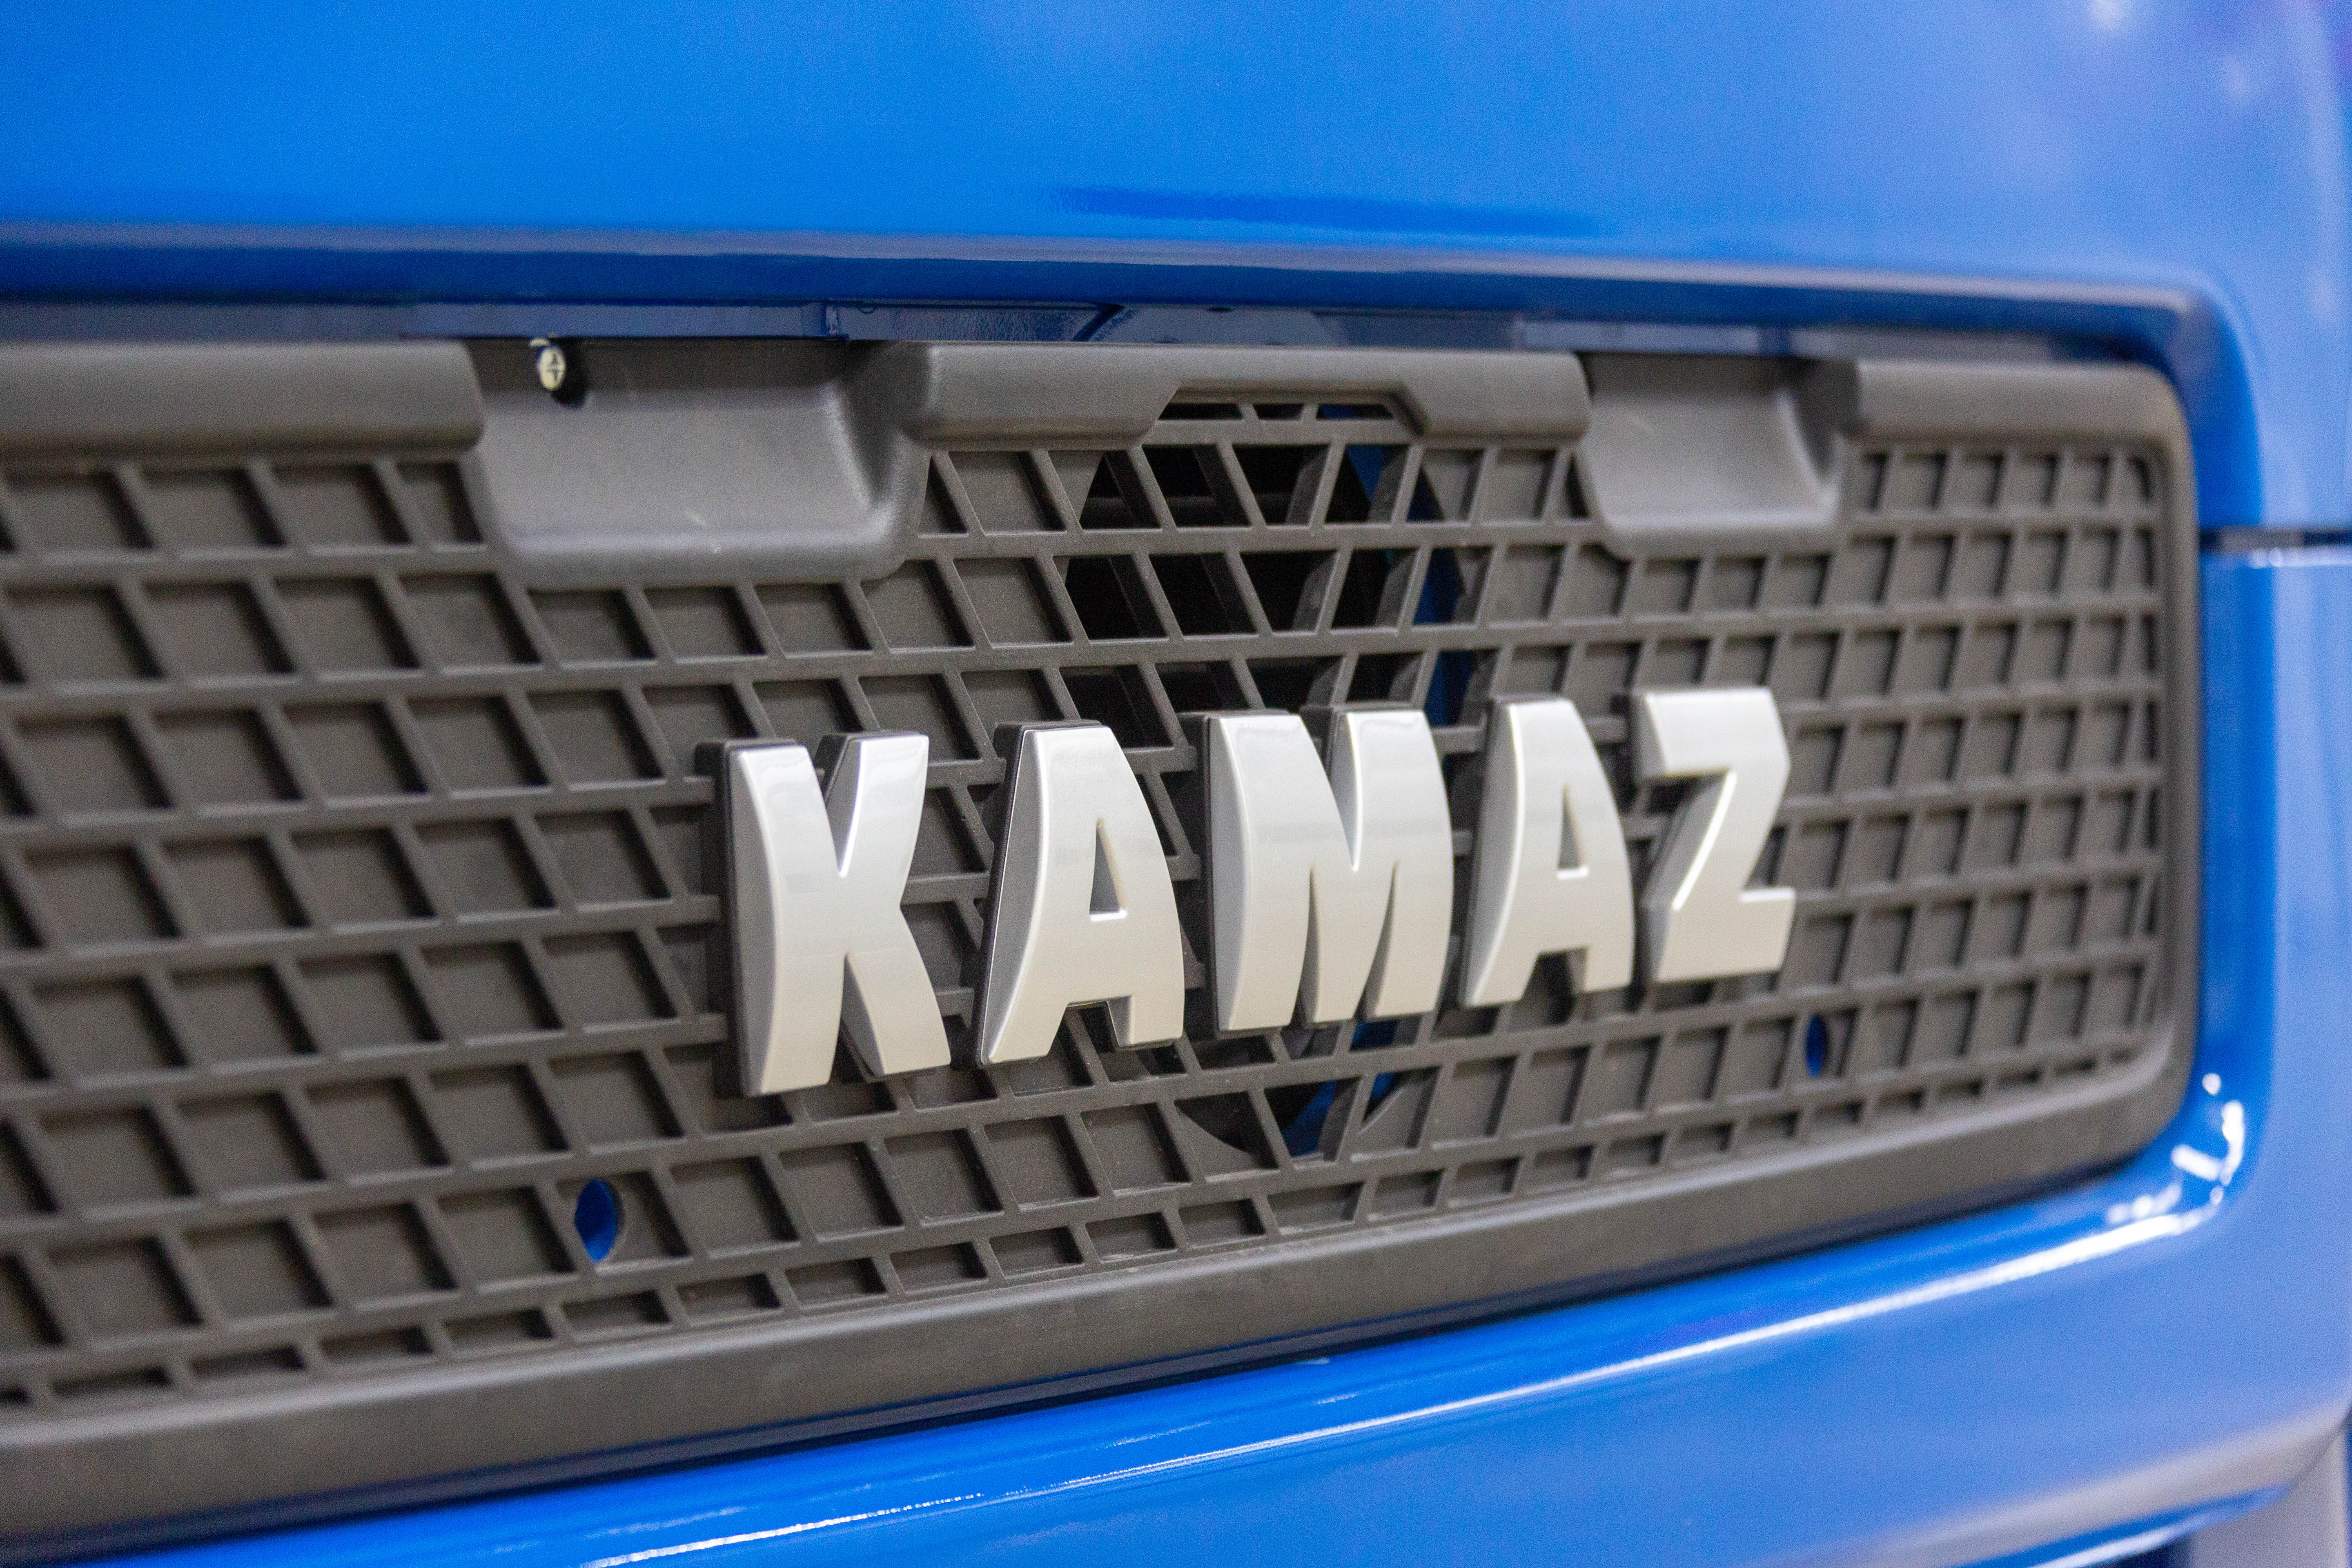 KAMAZ Plans to Create Hydrogen-powered Trucks and Buses